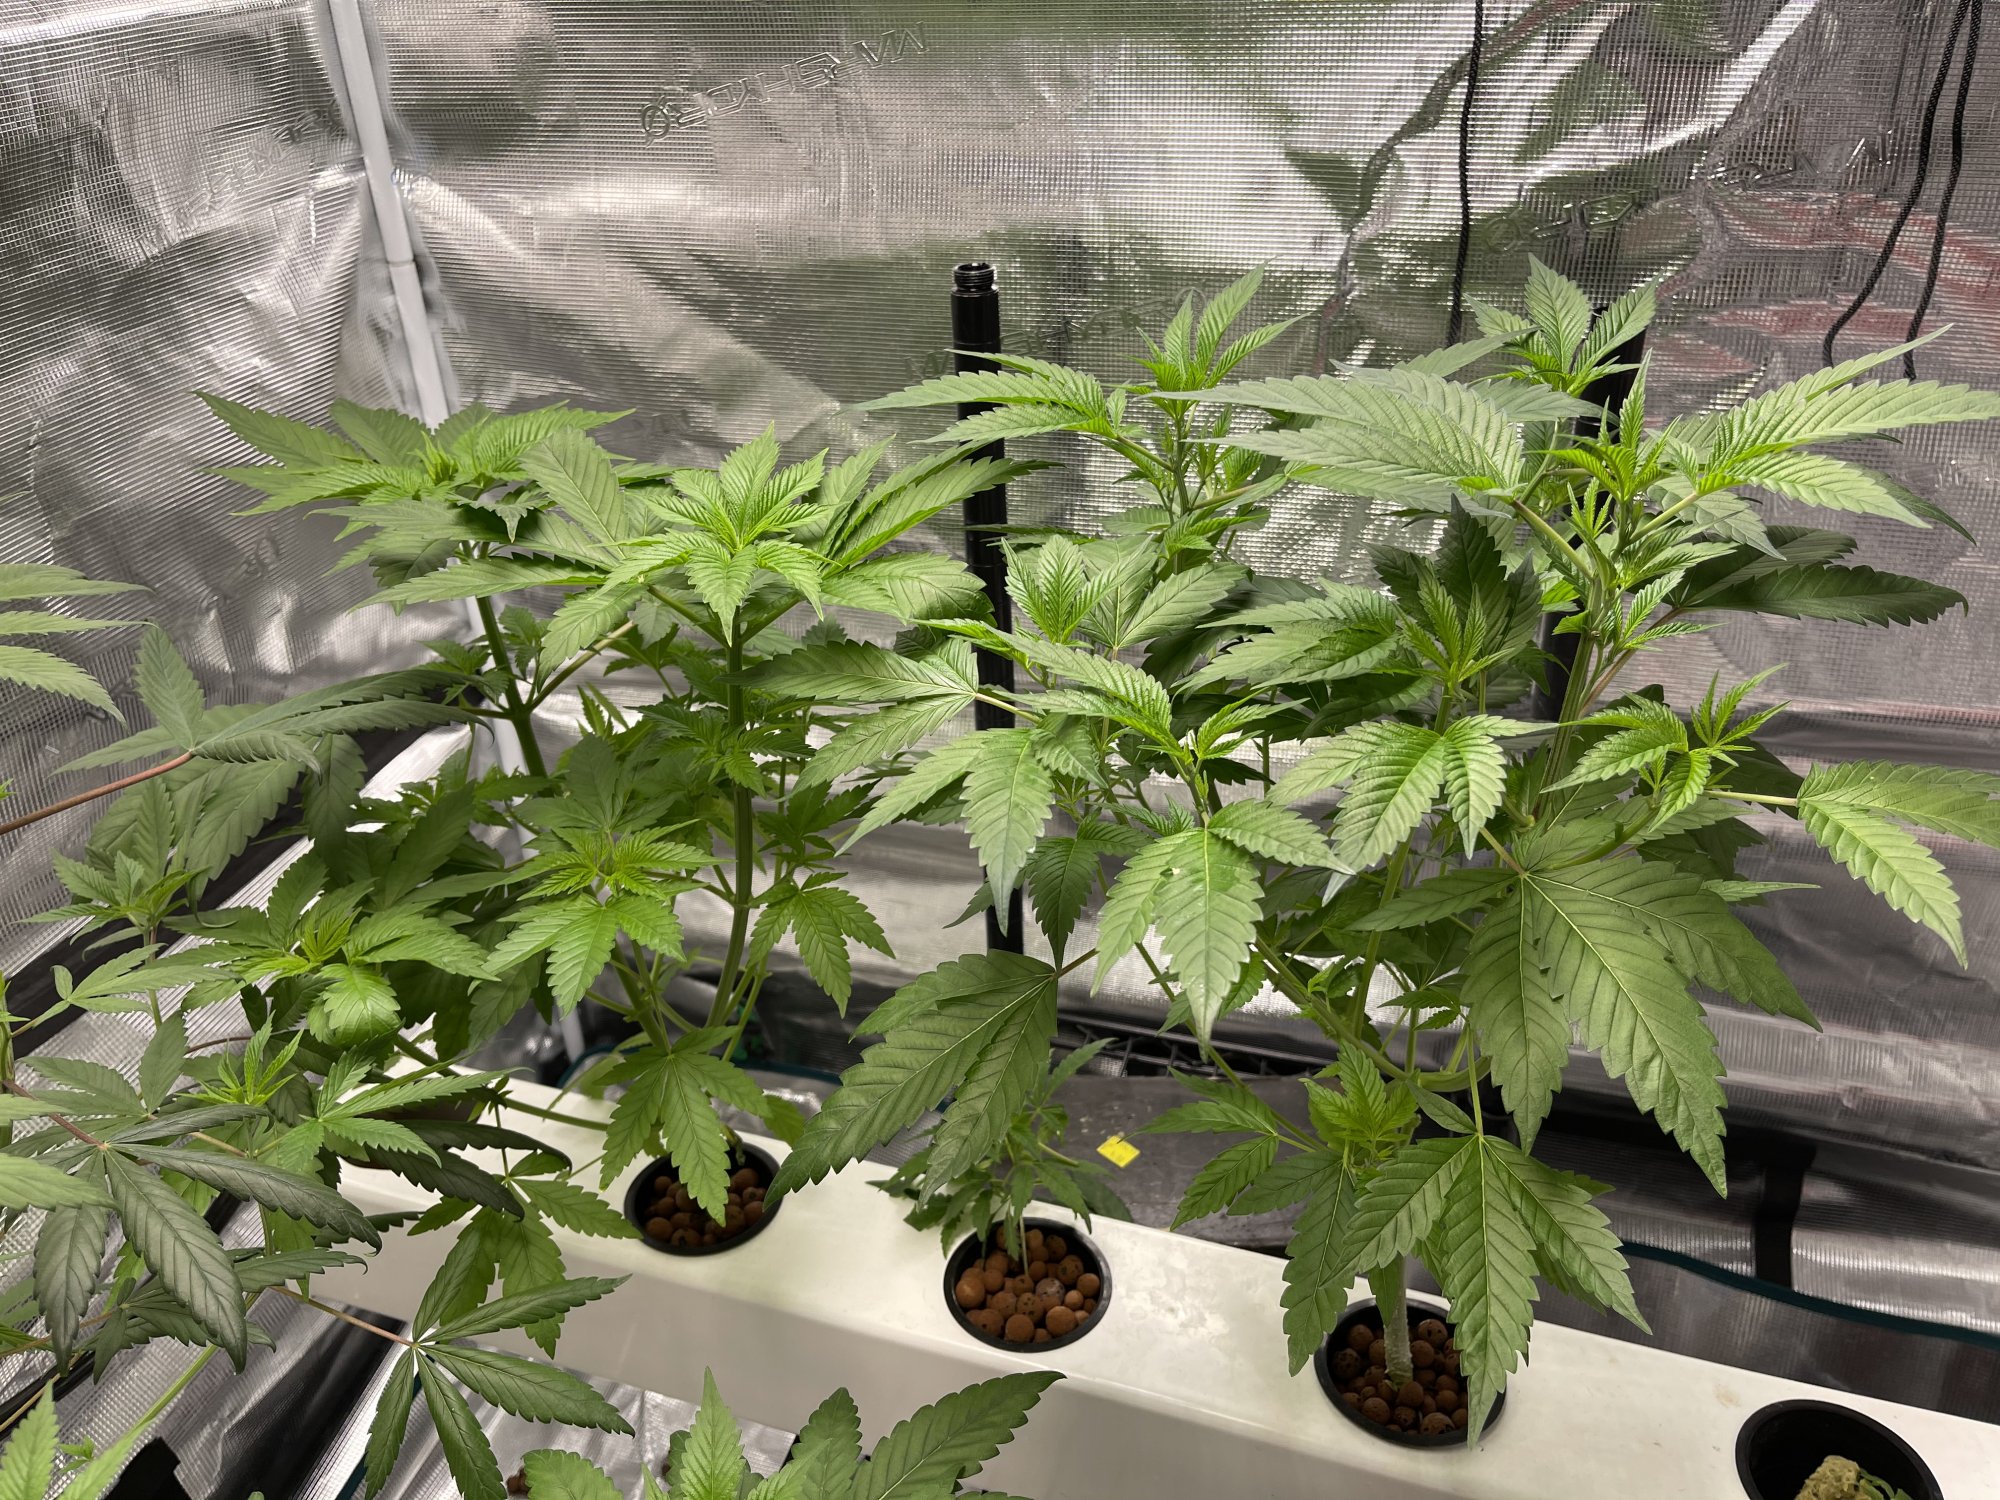 Working on my second grow 8